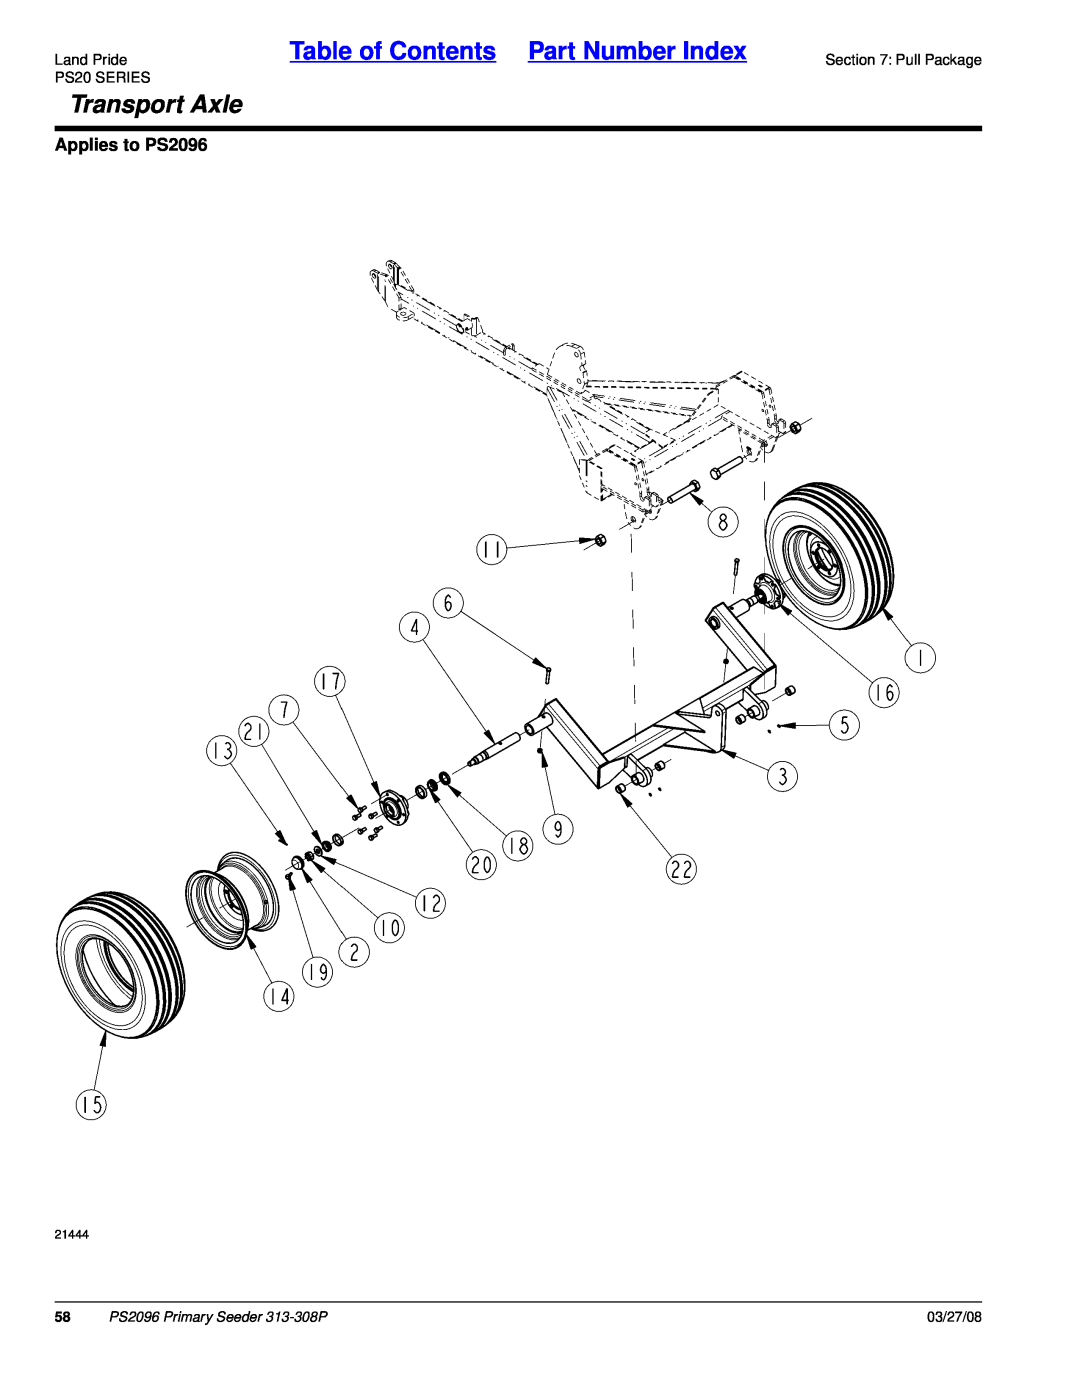 Land Pride manual Transport Axle, Table of Contents Part Number Index, Applies to PS2096, PS2096 Primary Seeder 313-308P 